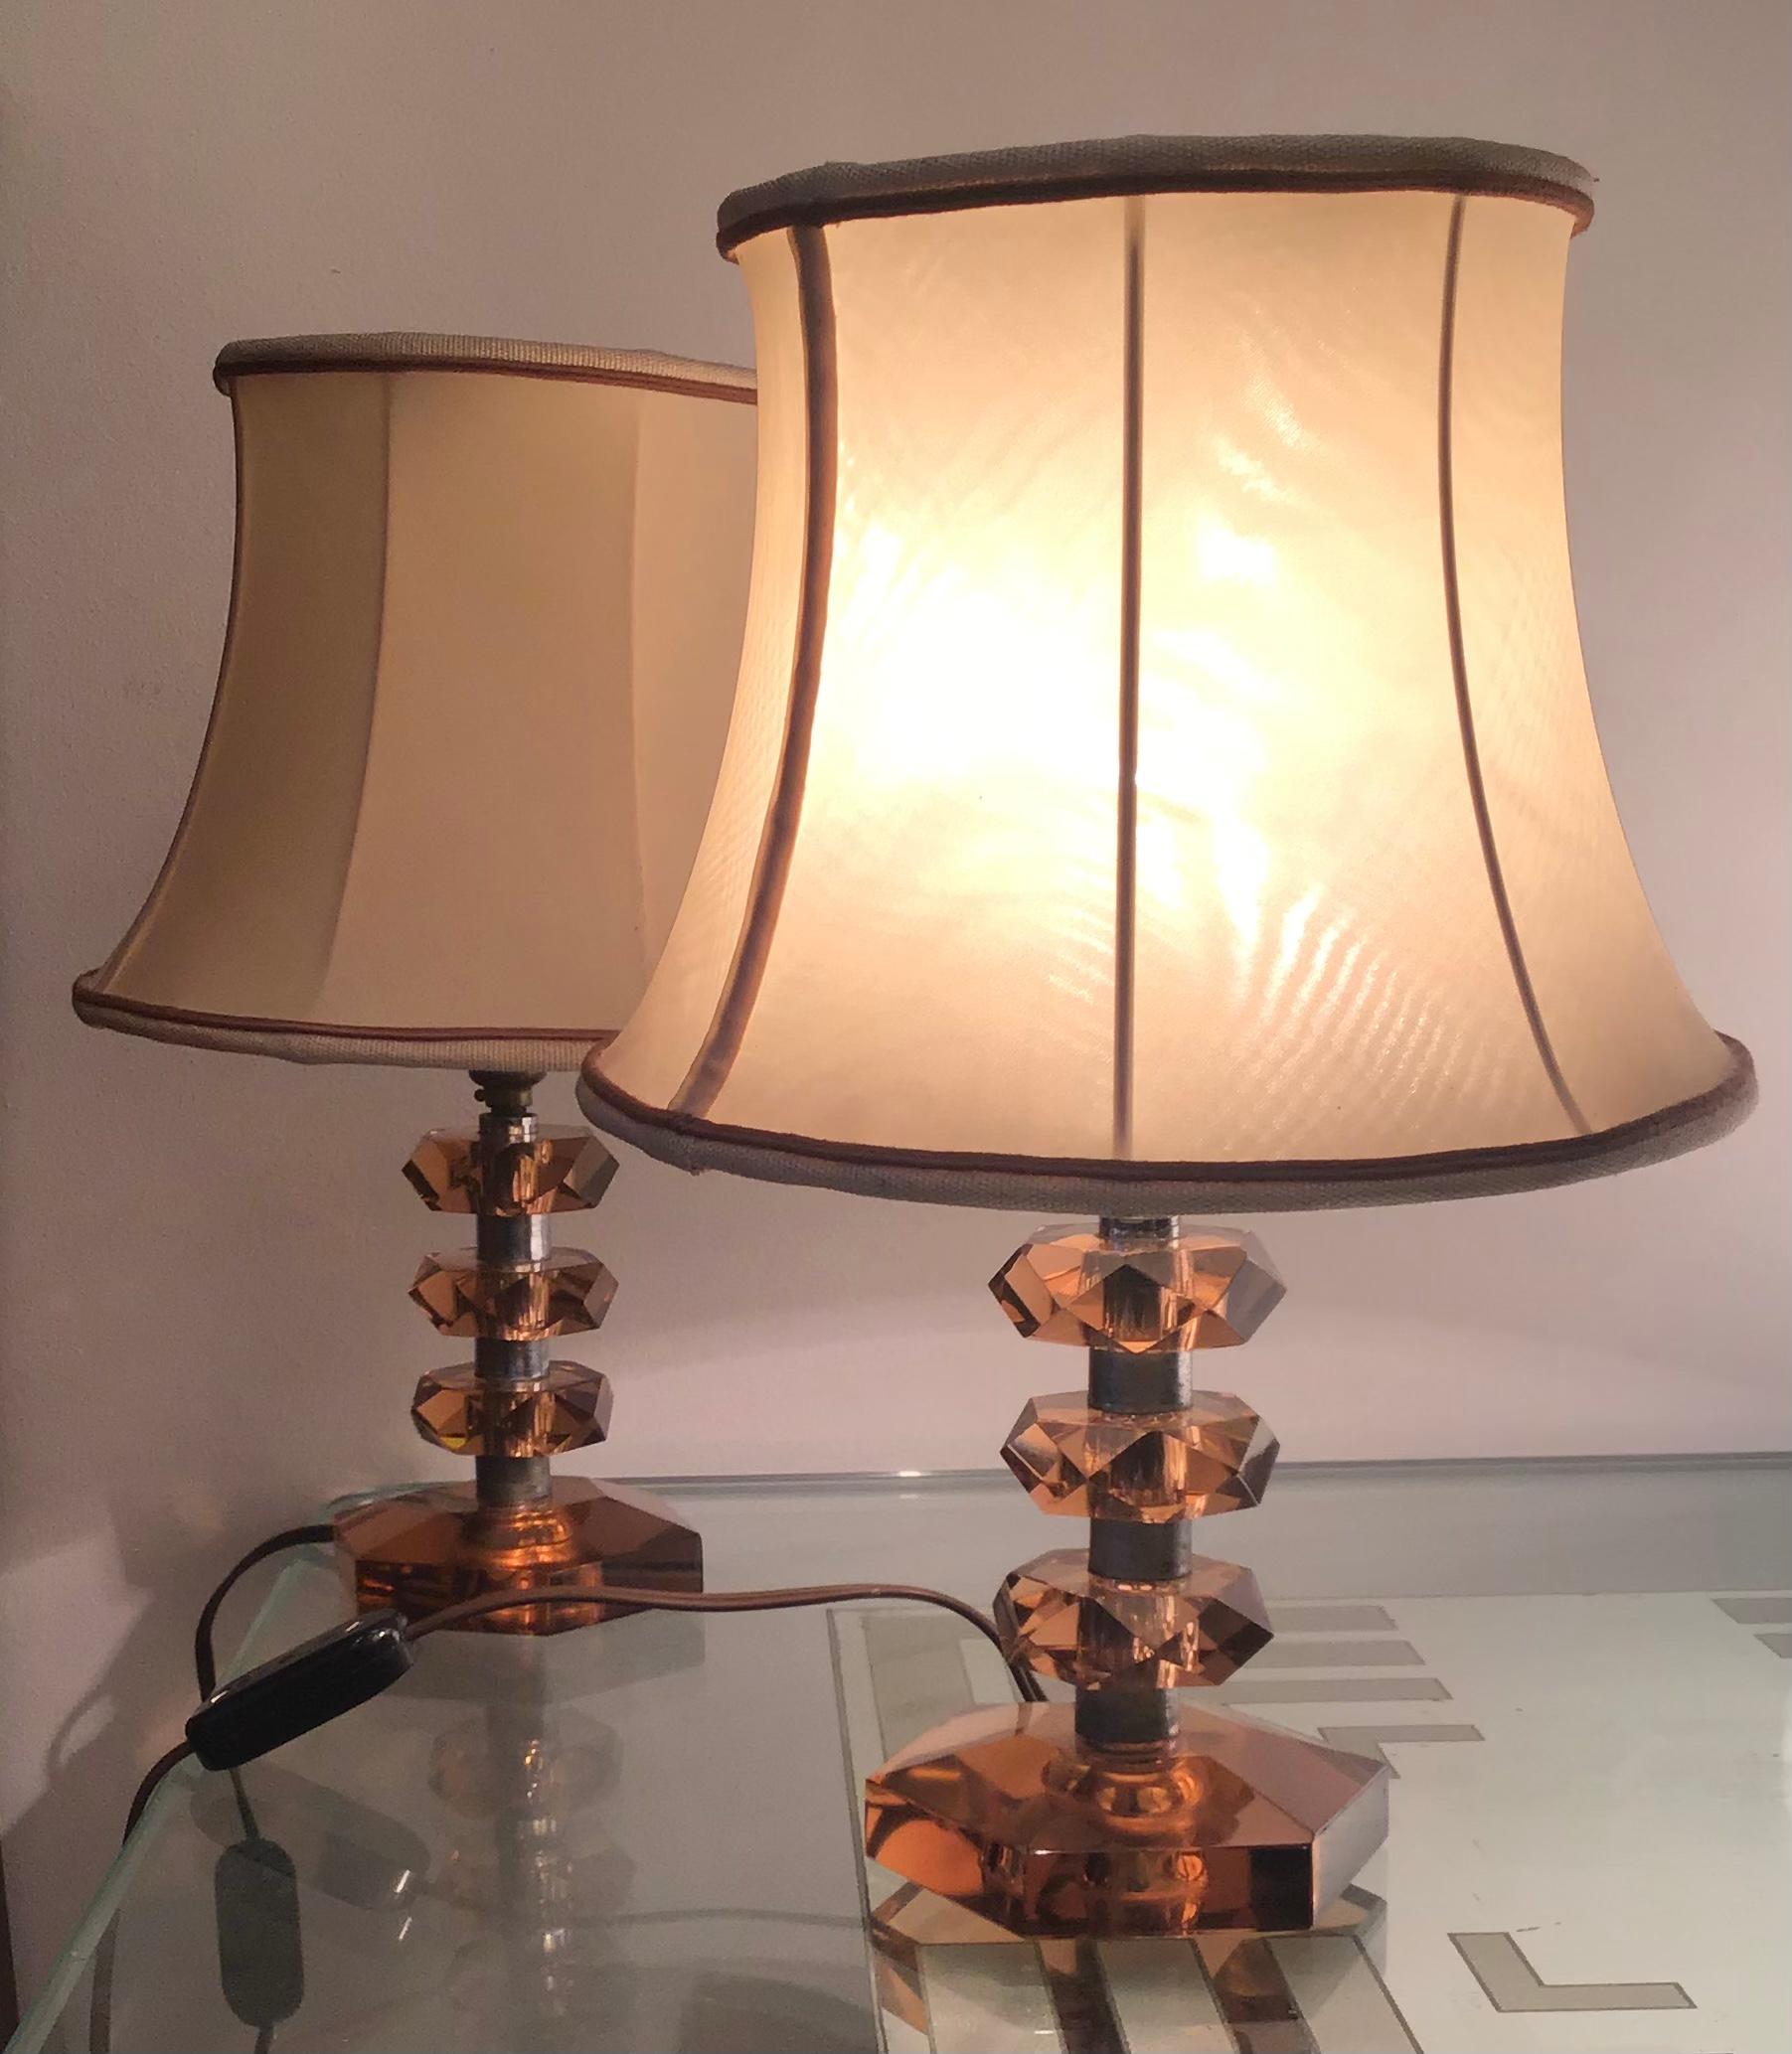 Mid-20th Century Cristal Arte Table Lamps Glass Metal Crome Fabric Lampshade, 1950, Italy For Sale